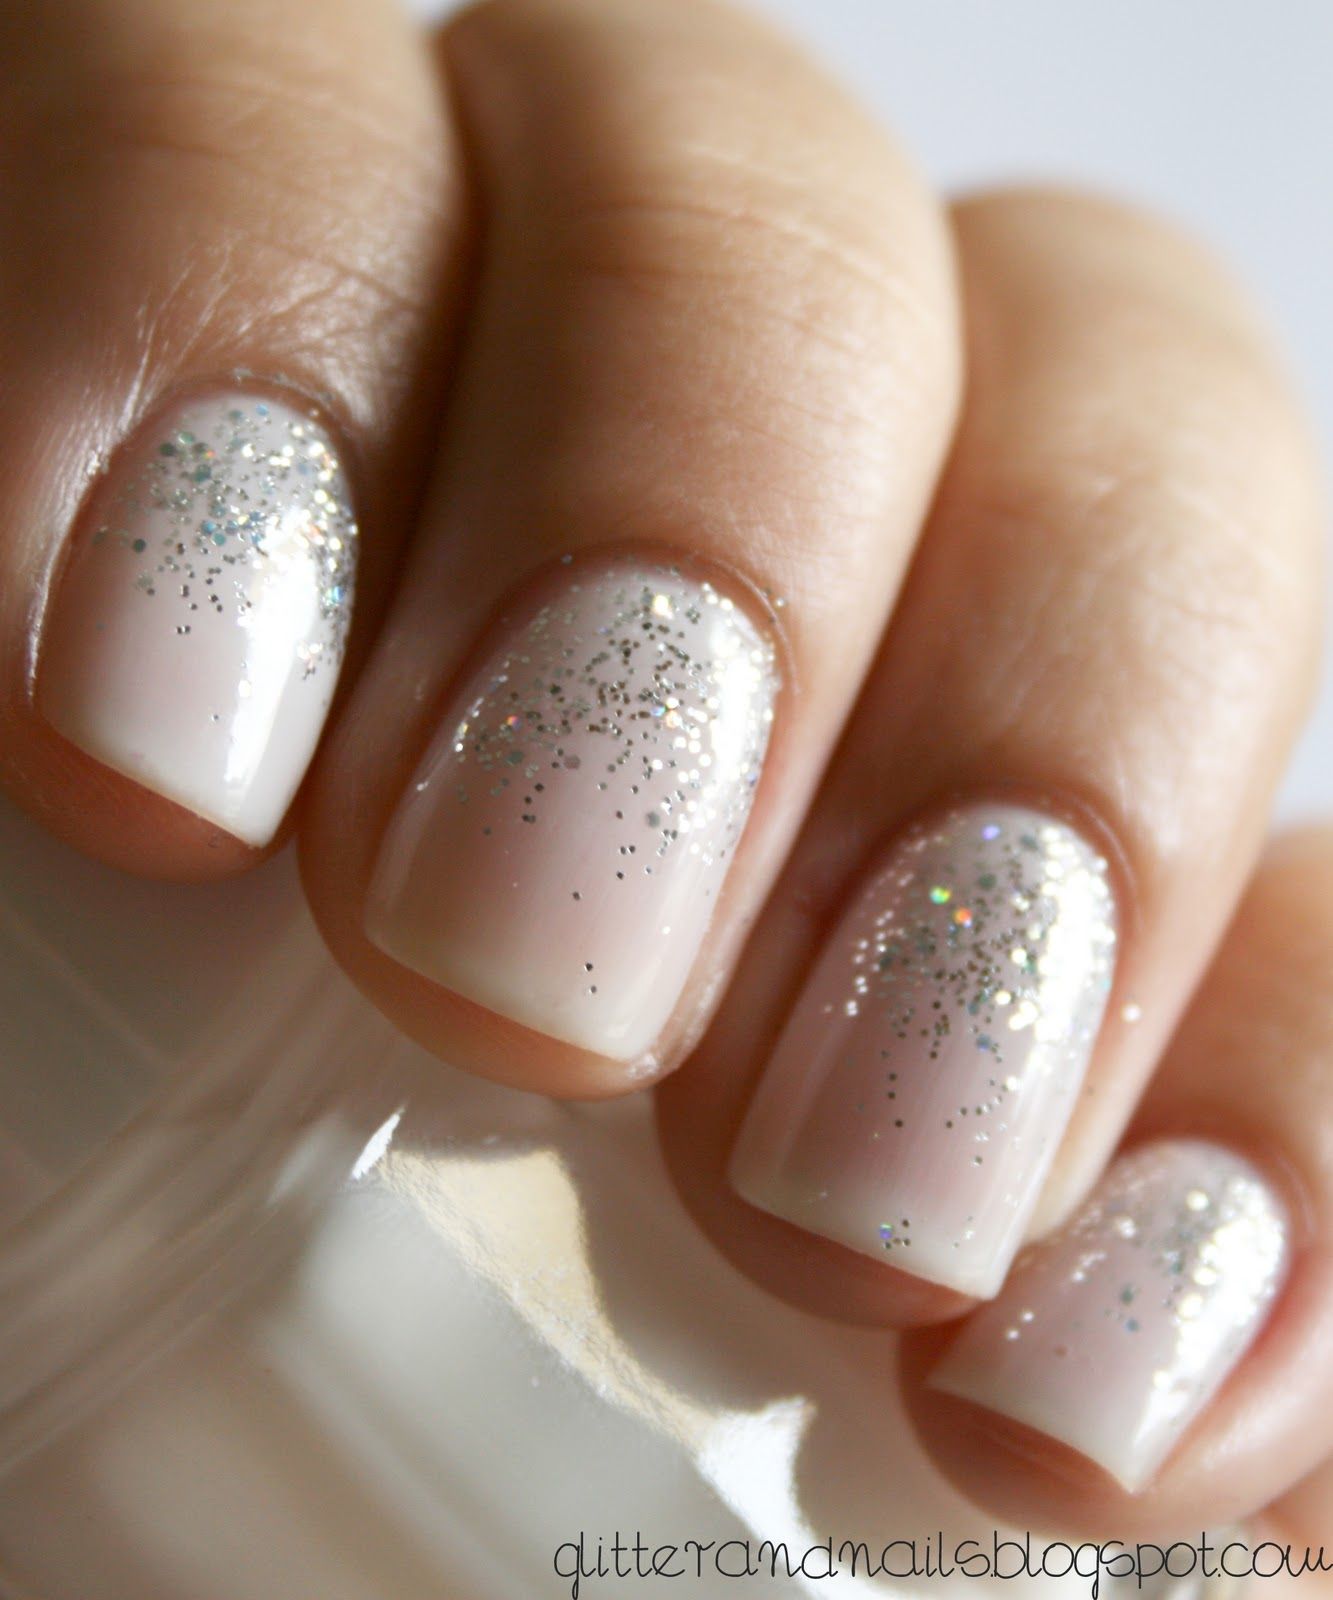 subtle sparkly nails – pretty for holiday season